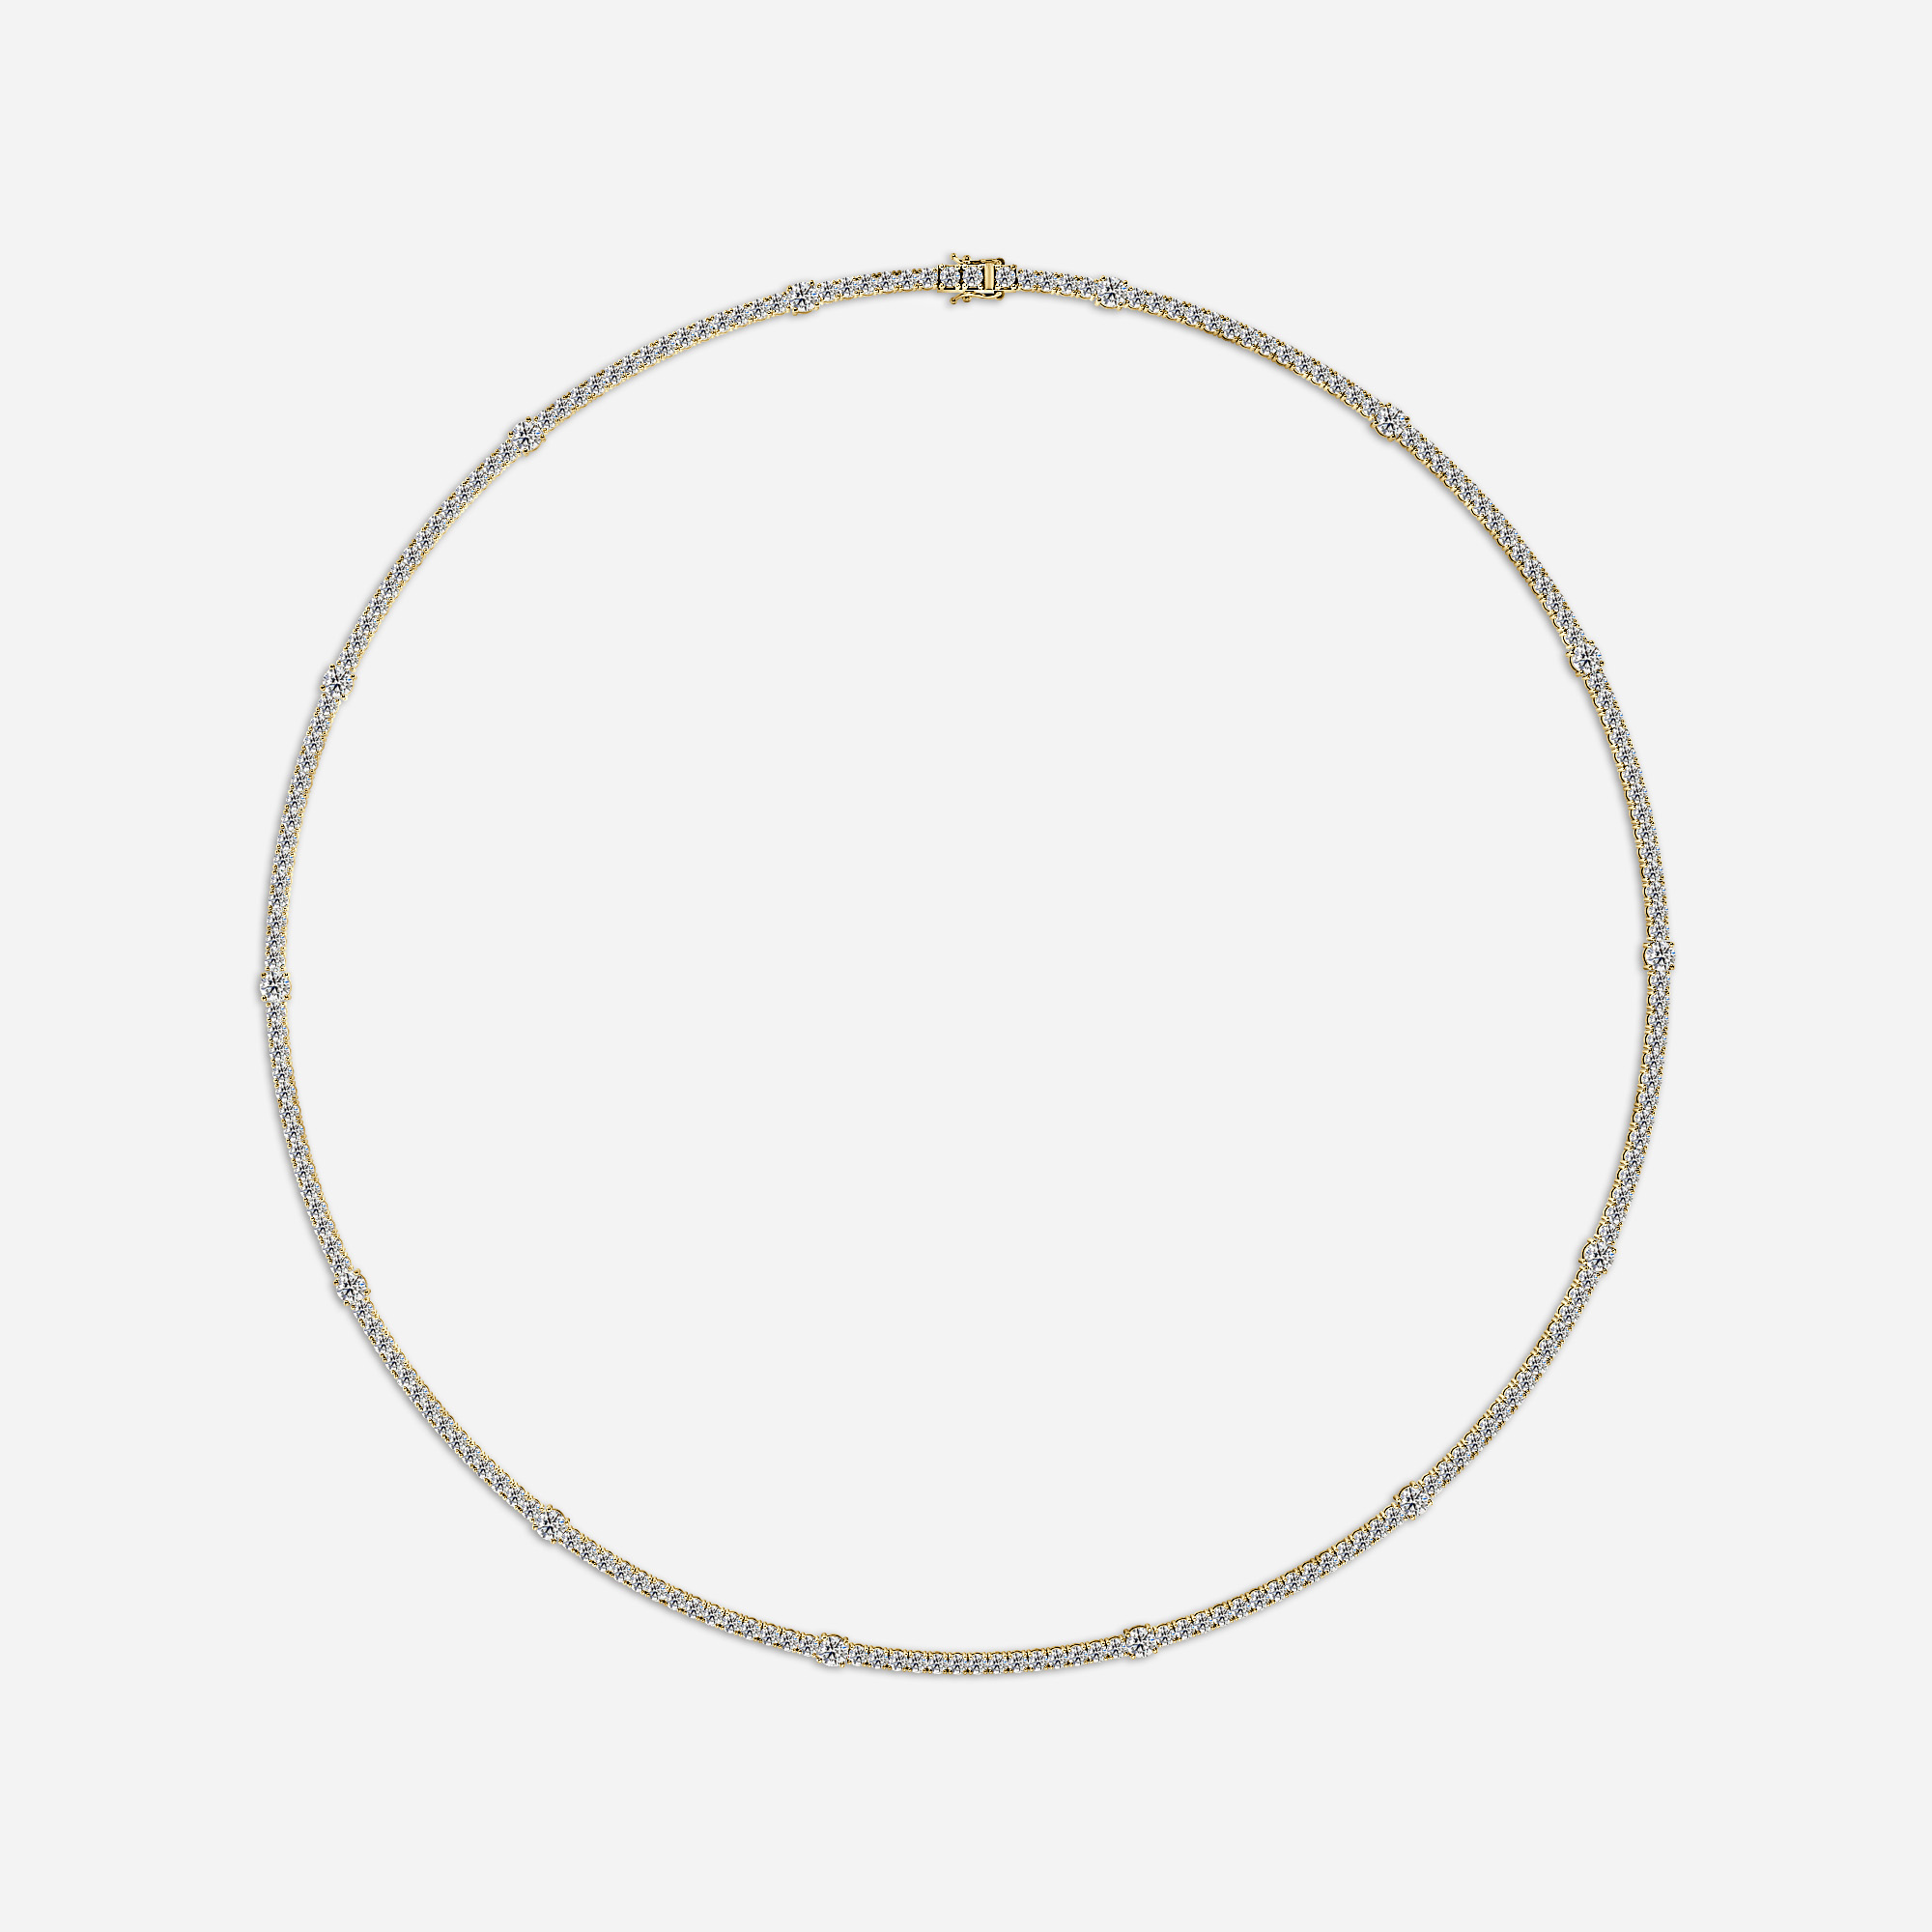 7.24 Ct Diamond Tennis Necklaces In Yellow Gold